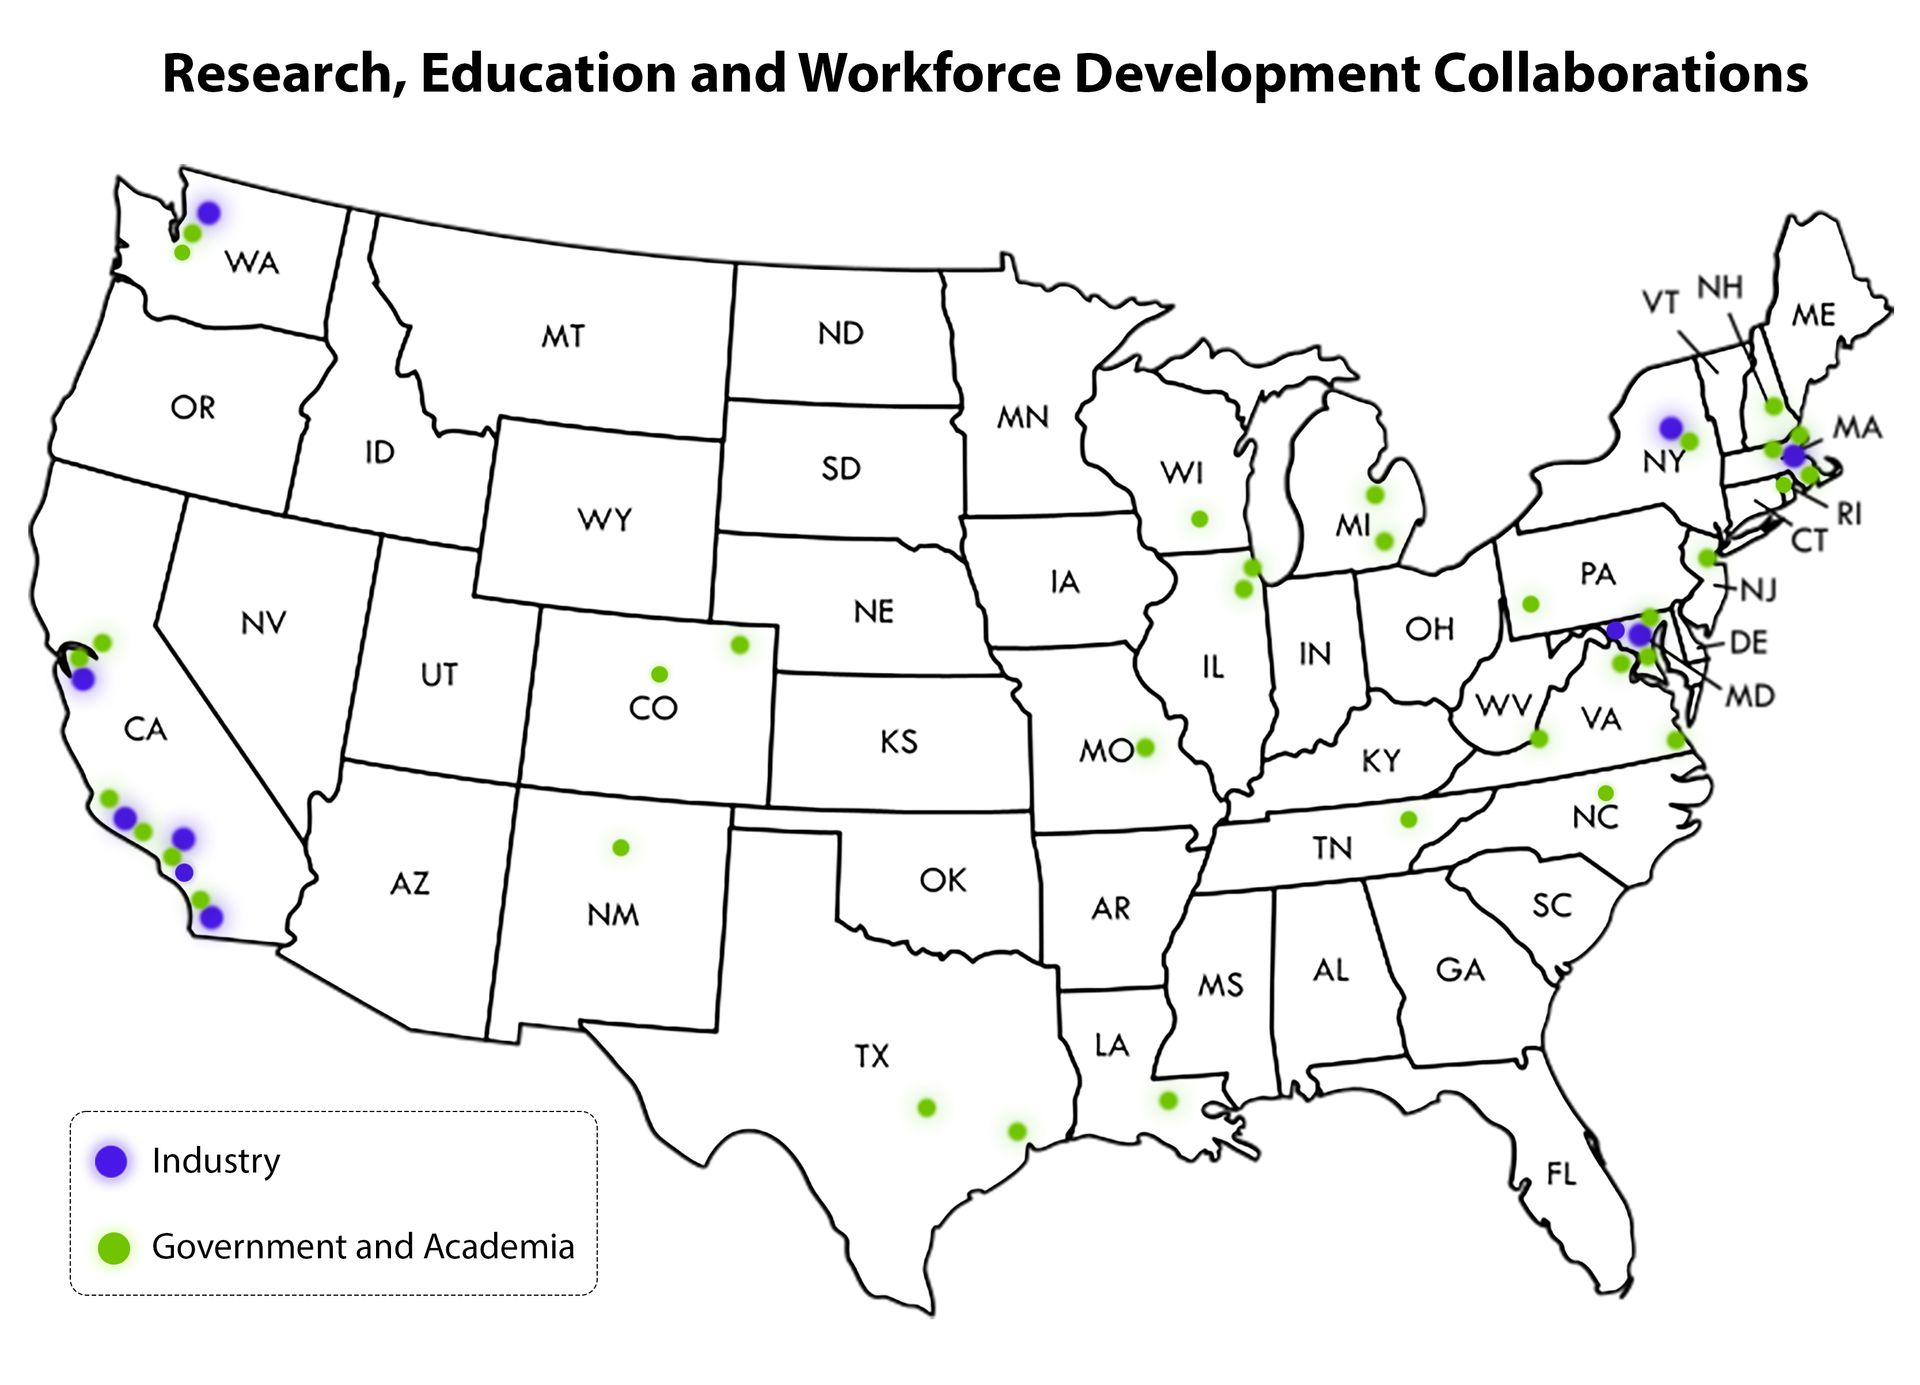 A map showing RQS's partners across the US